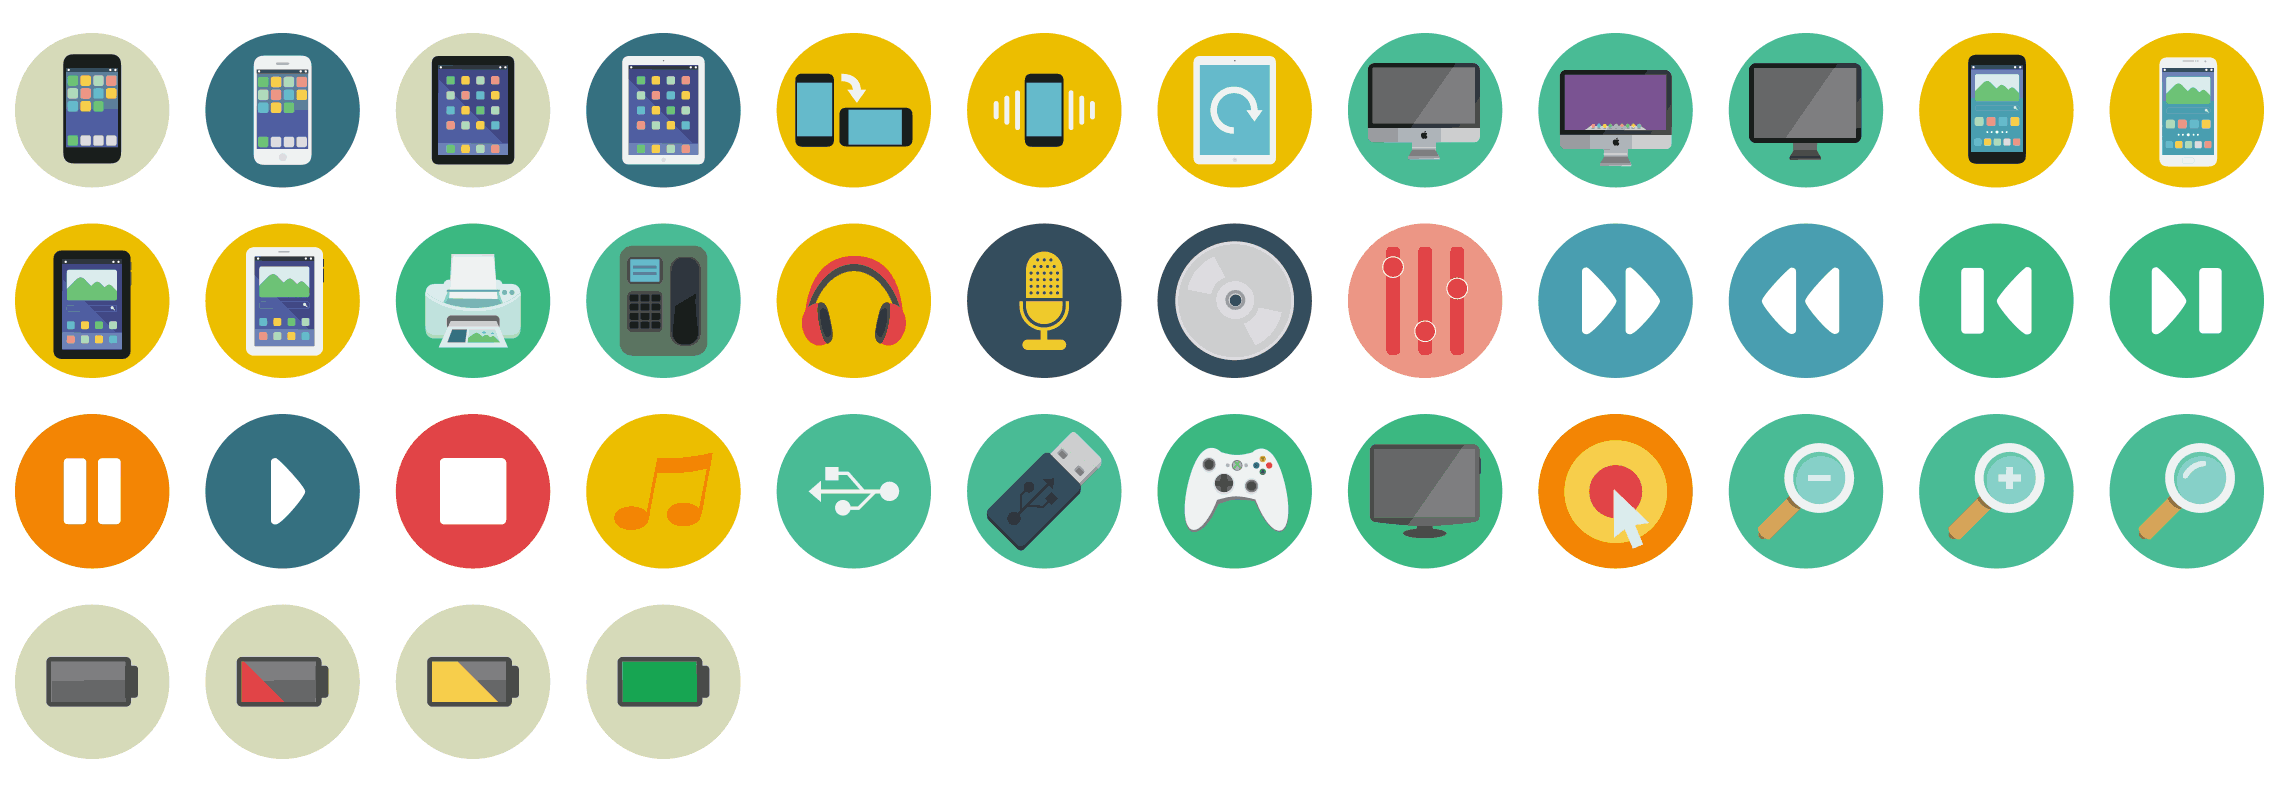 multimedia-flat-icons-vol-1-preview